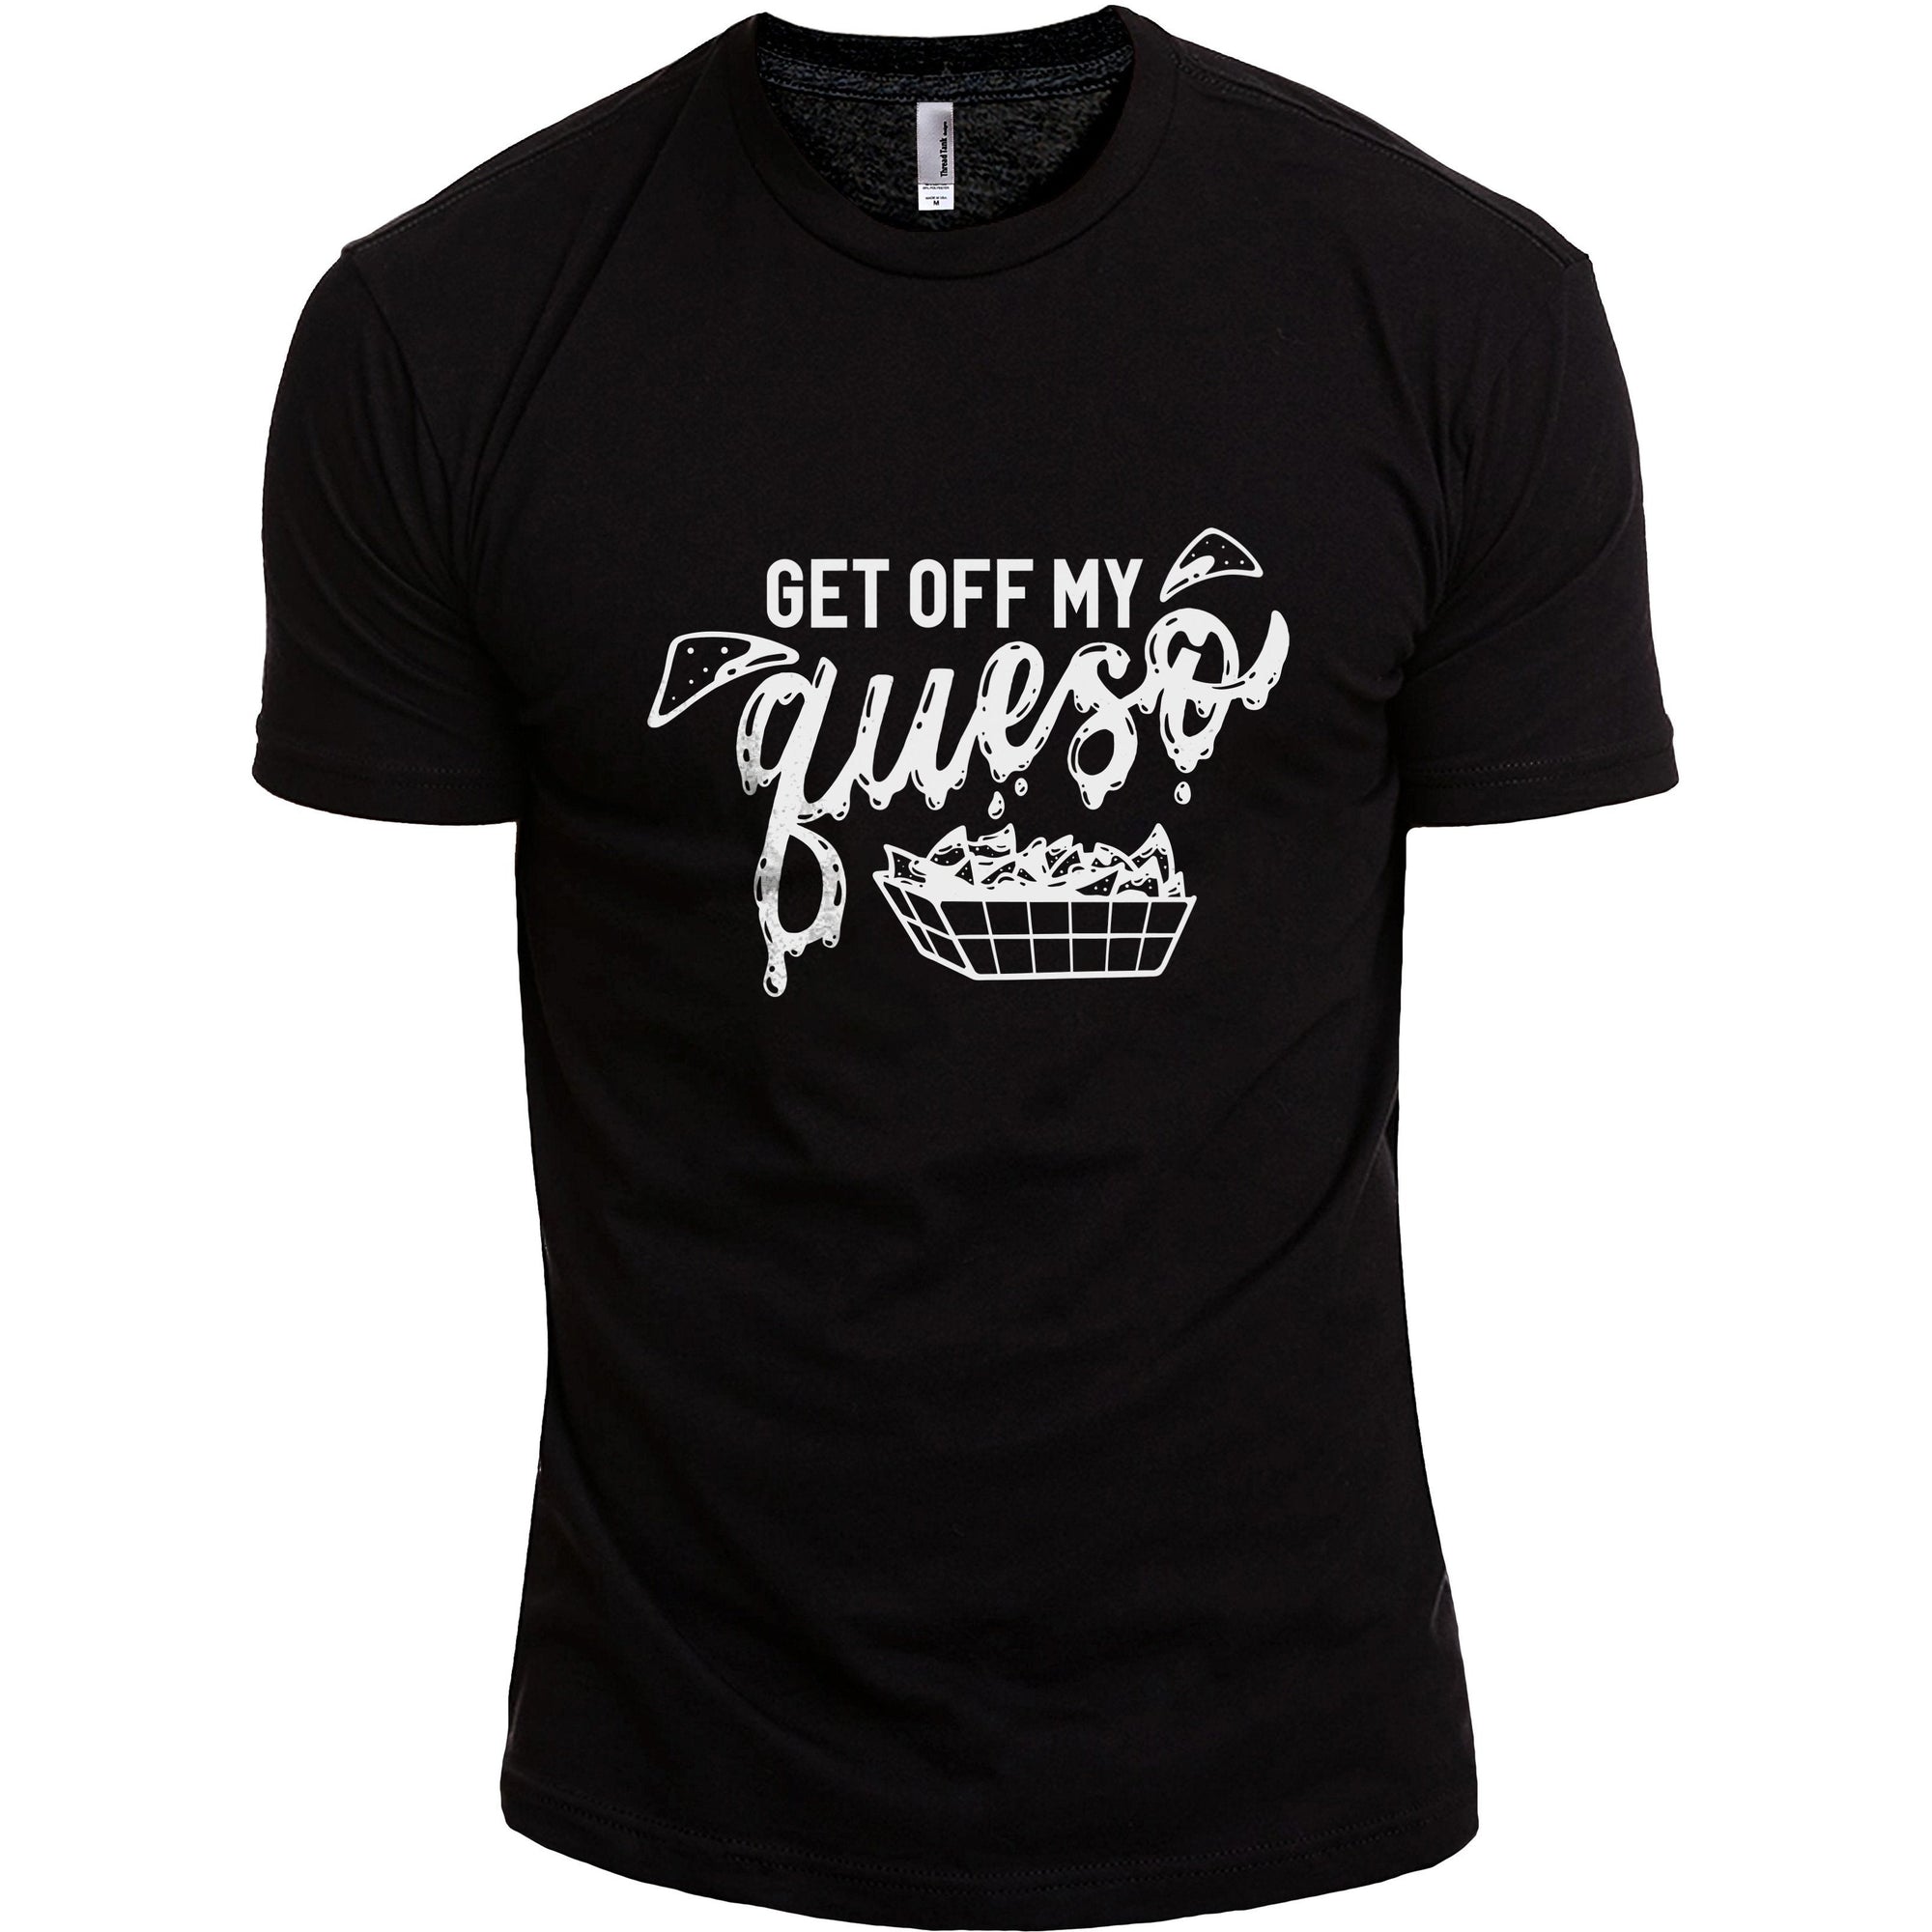 Get Off My Queso - Stories You Can Wear by Thread Tank